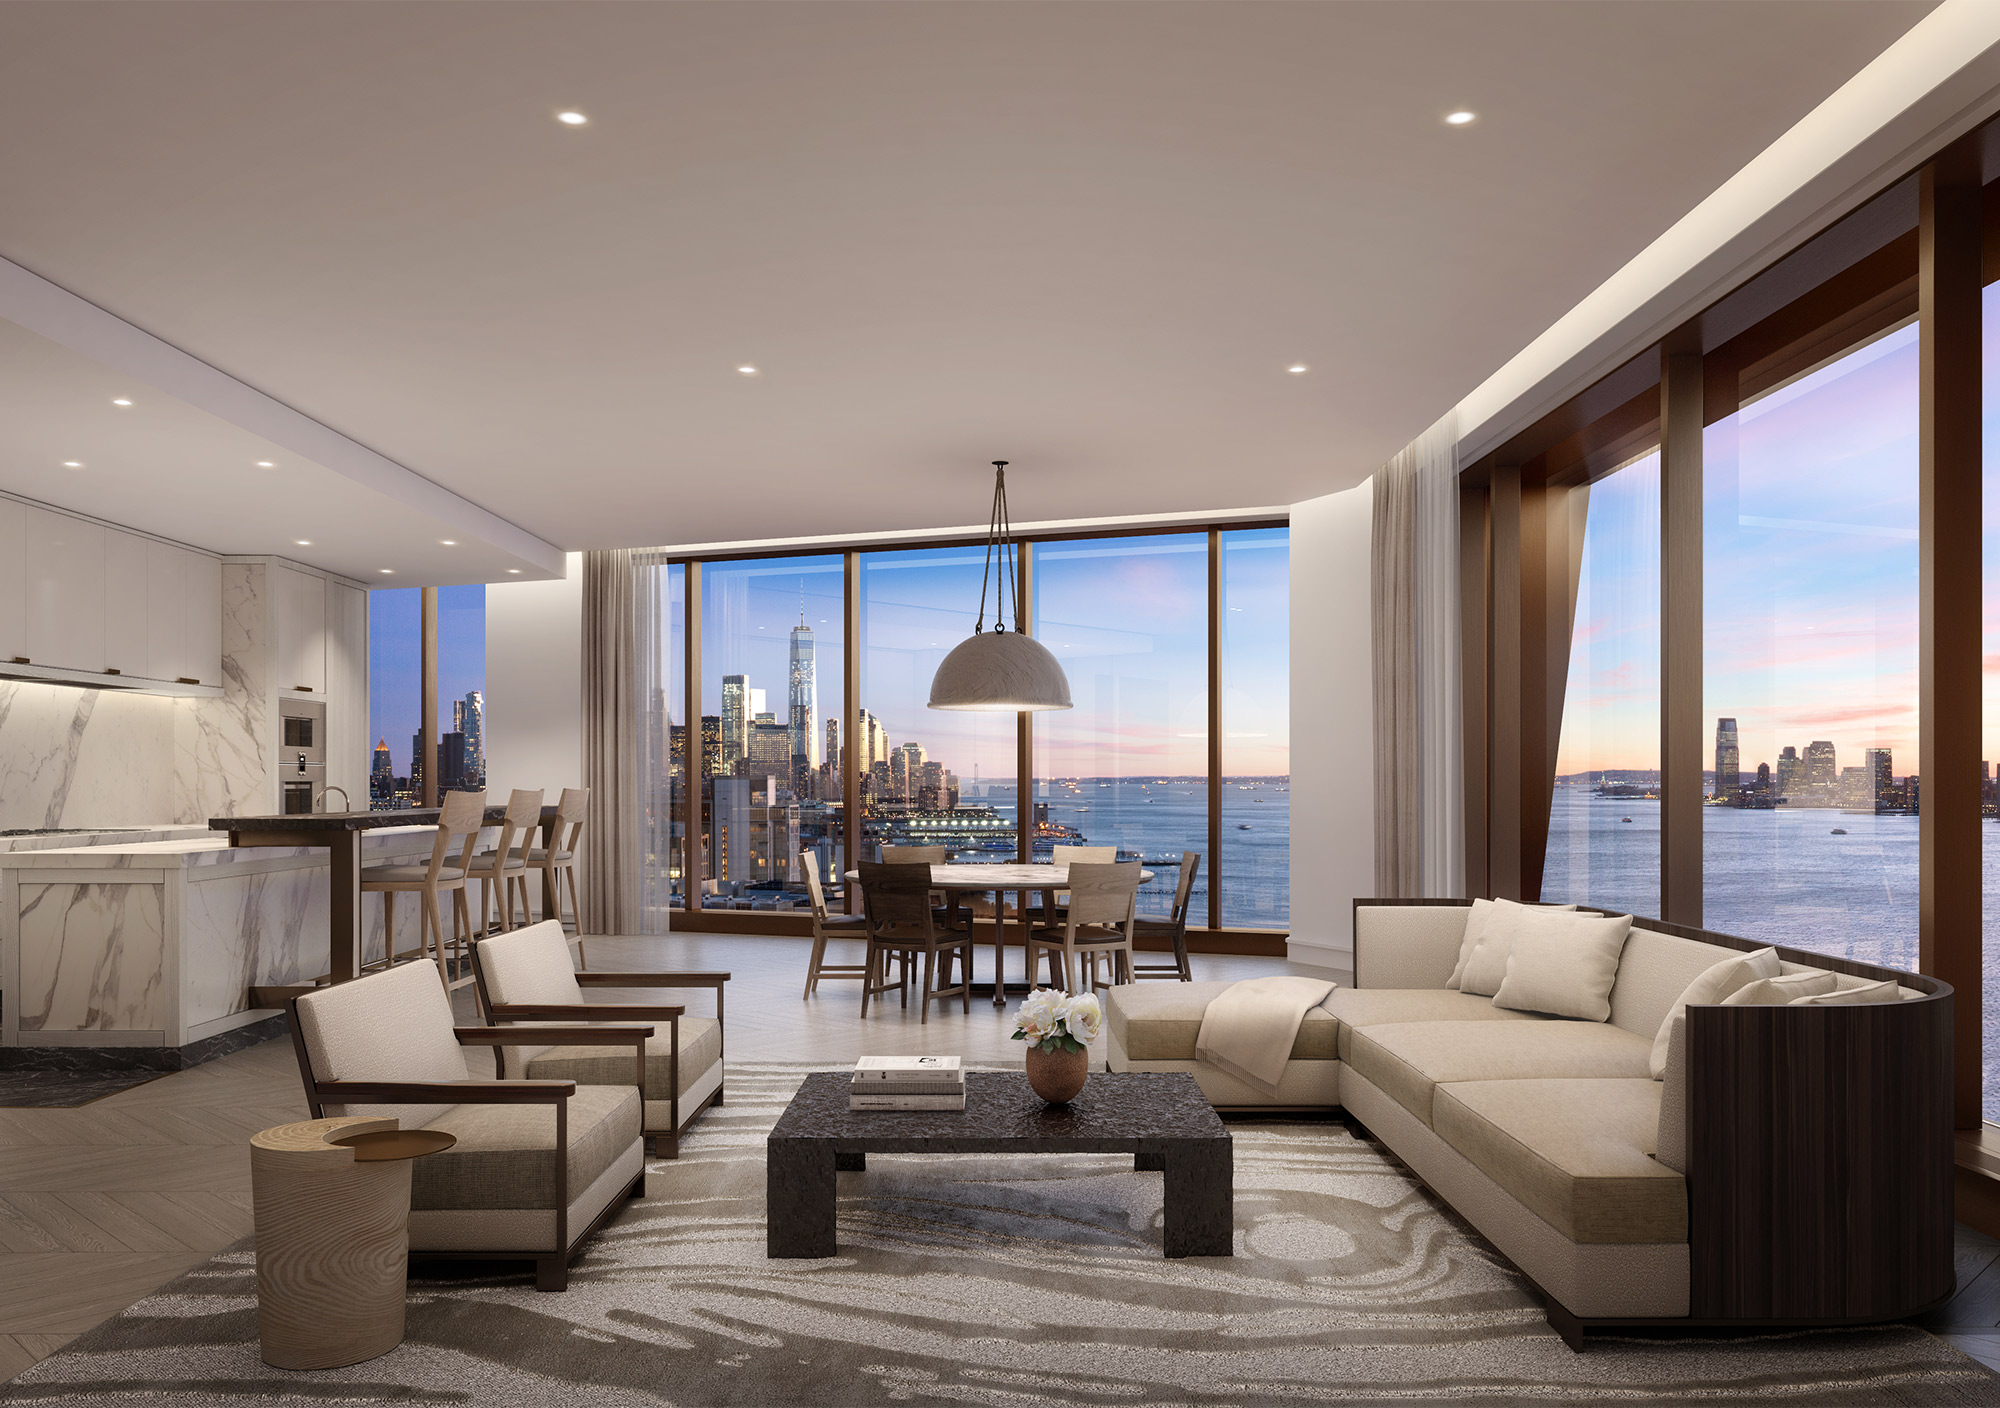 Luxurious living area overlooking the Hudson River and city skyline